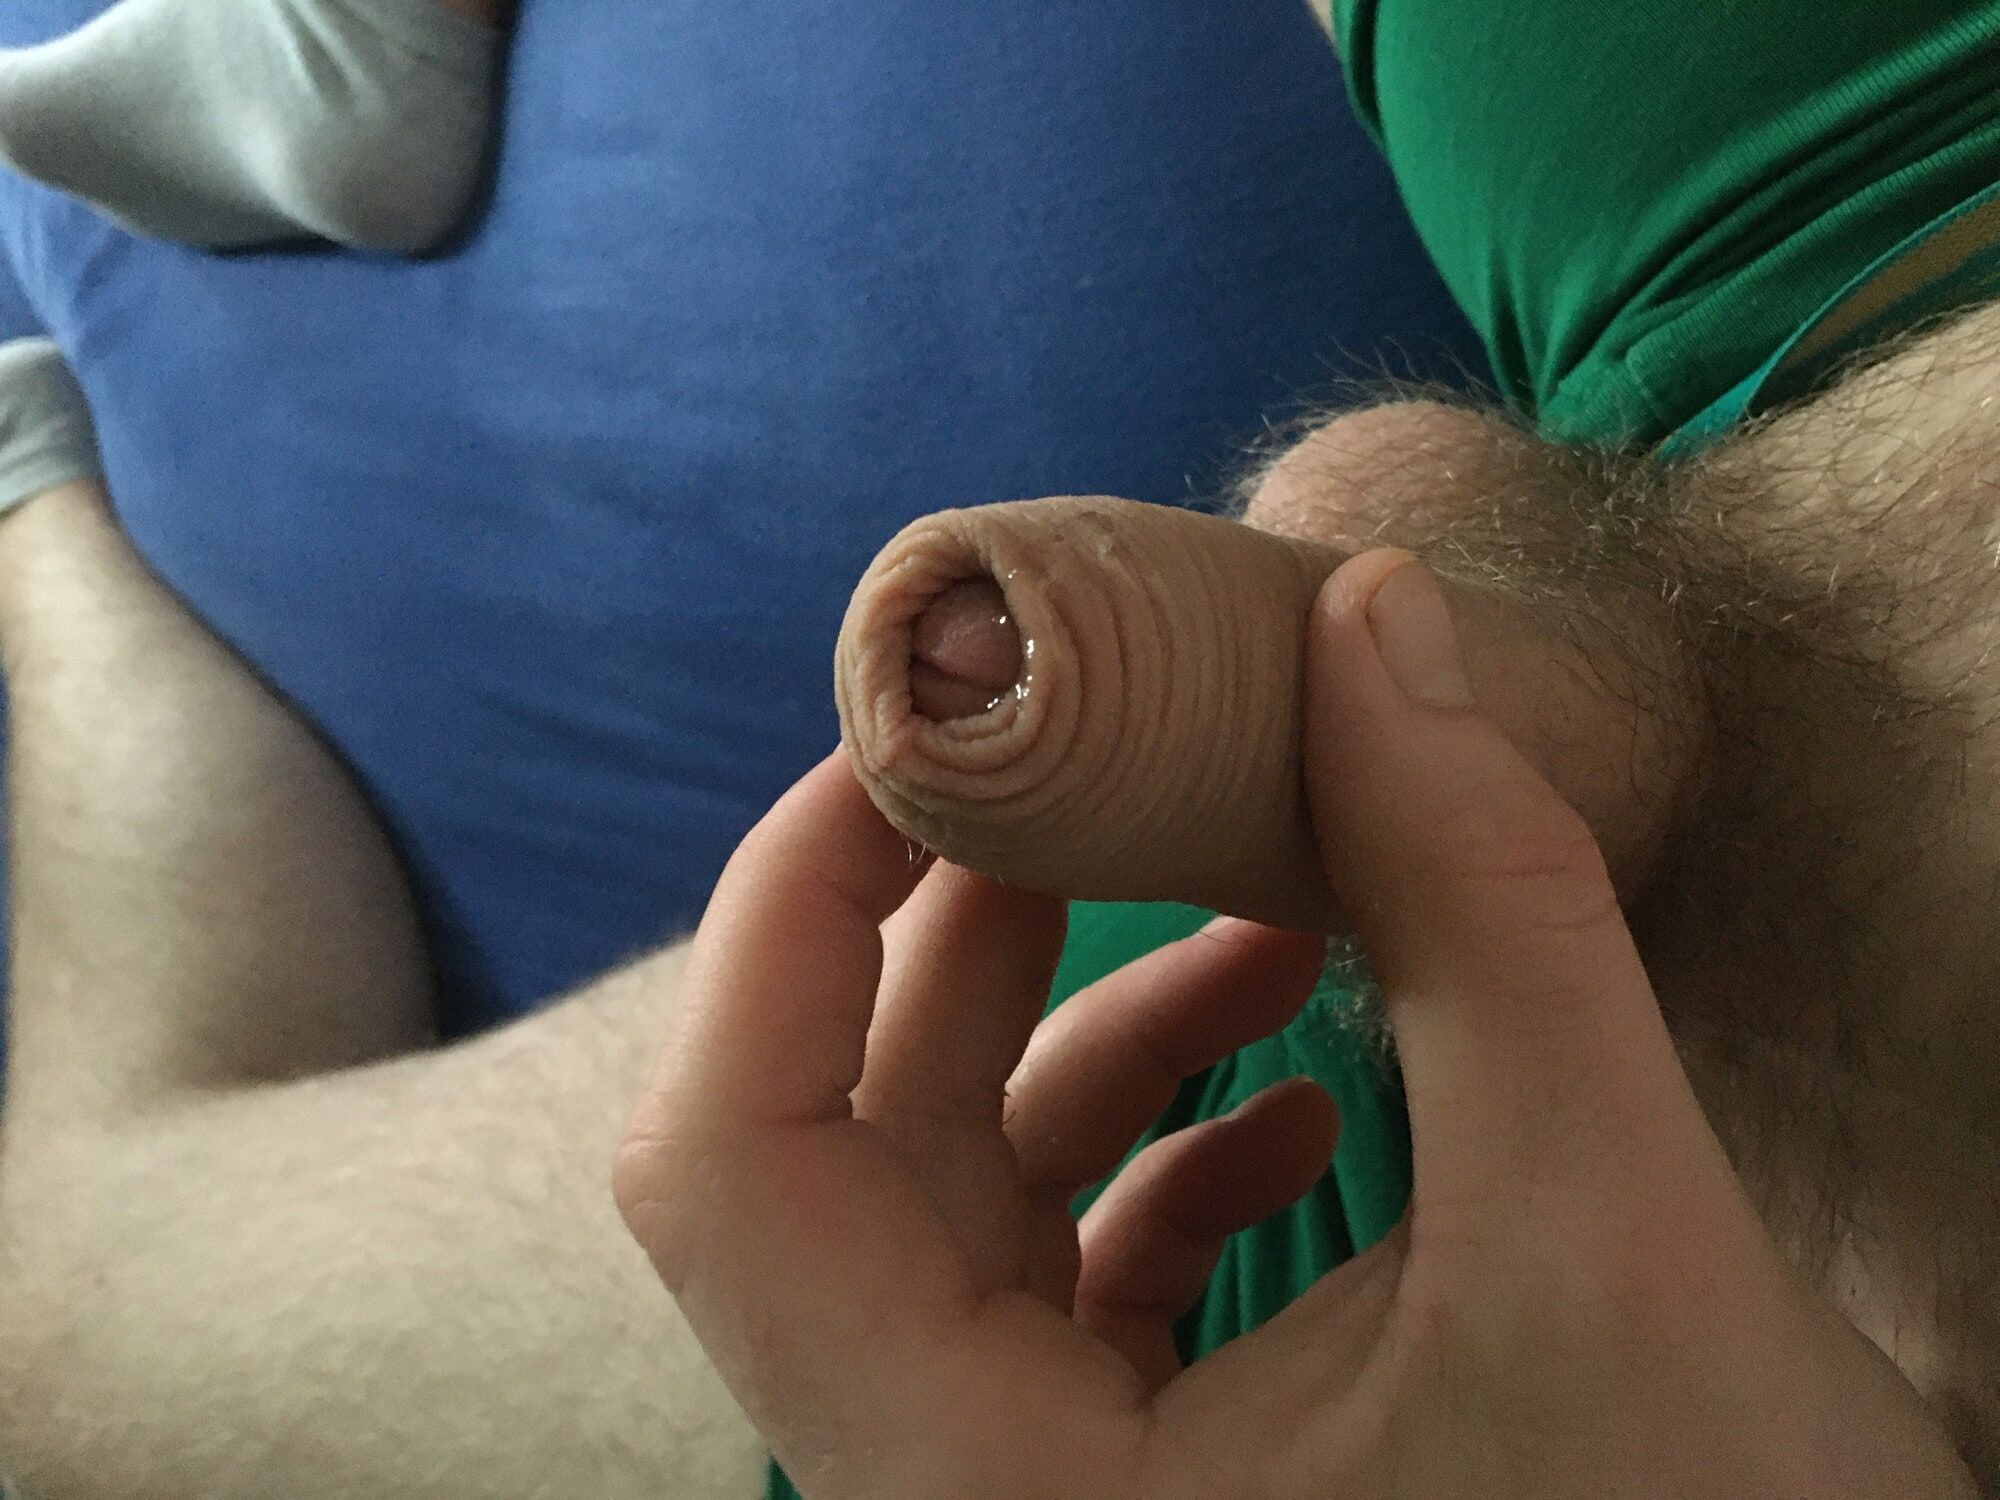 Hairy Dick And Balls Cockhead Foreskin Play With Pre- Cum #47